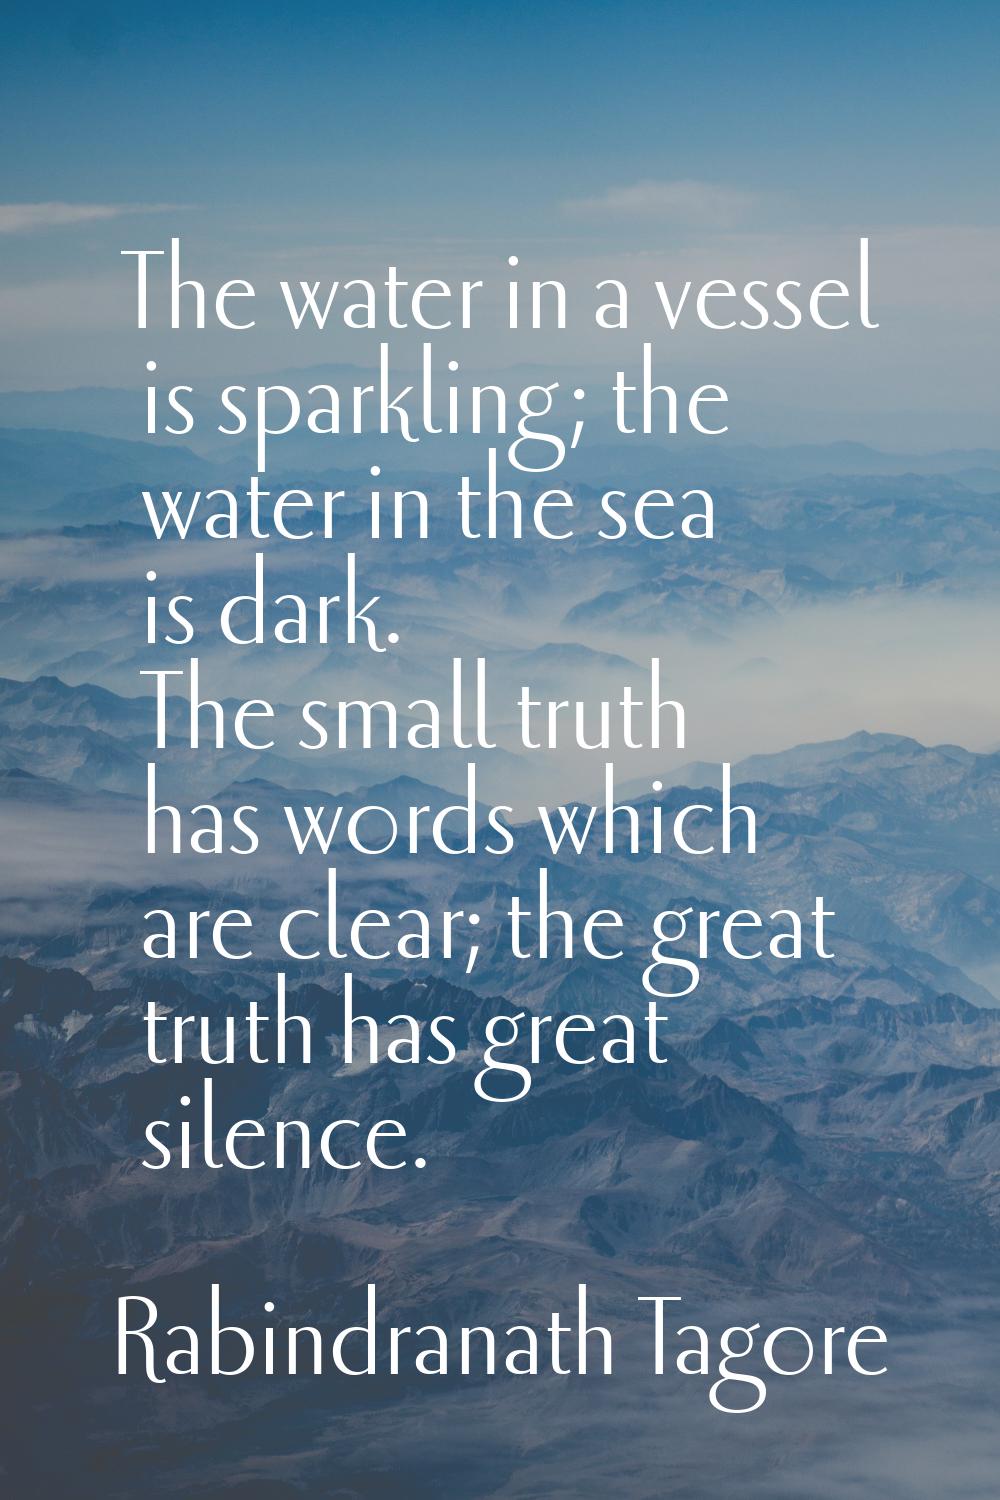 The water in a vessel is sparkling; the water in the sea is dark. The small truth has words which a